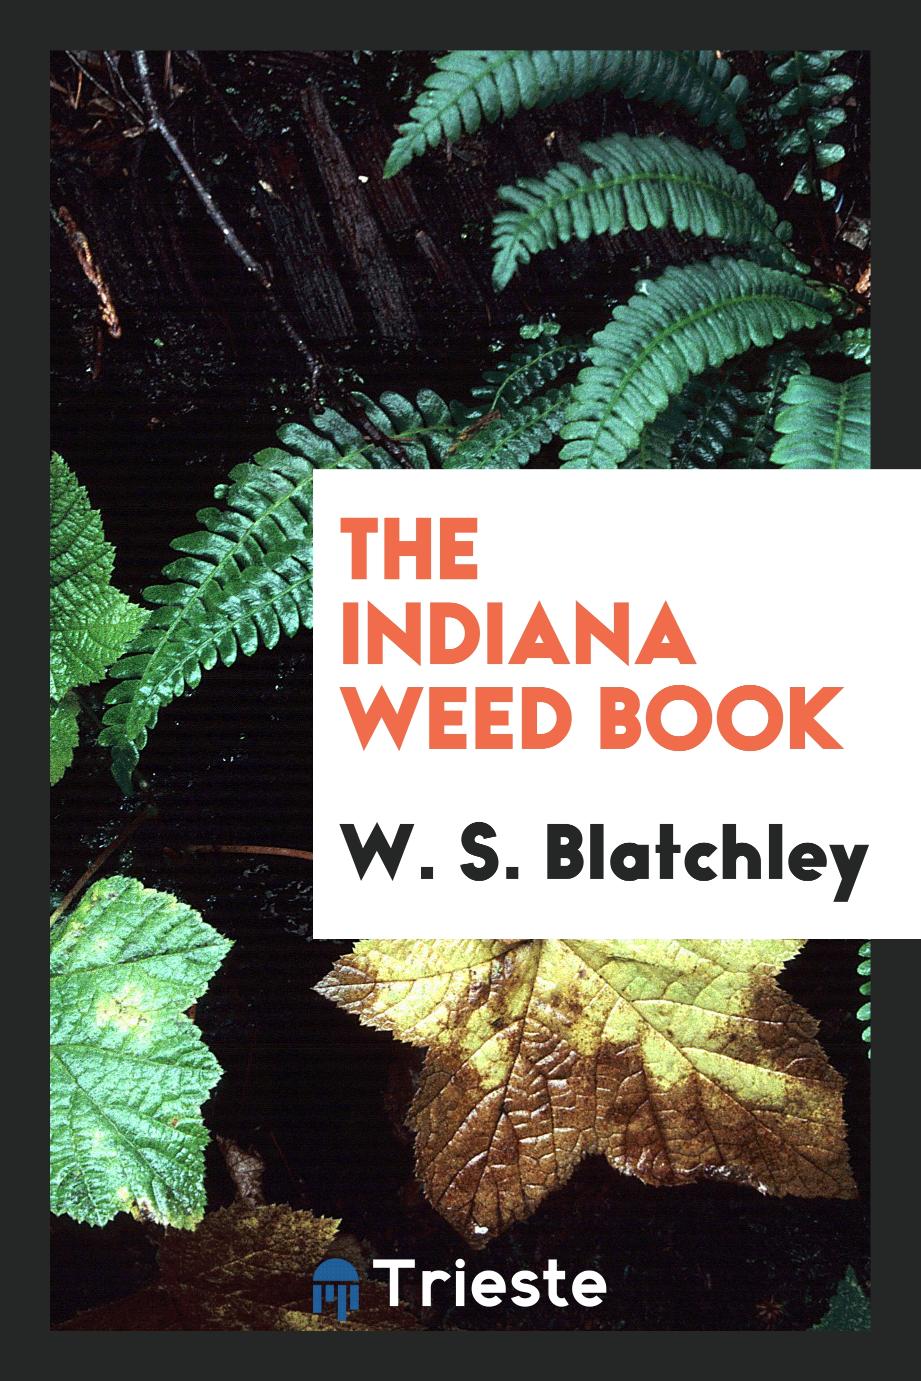 The Indiana weed book